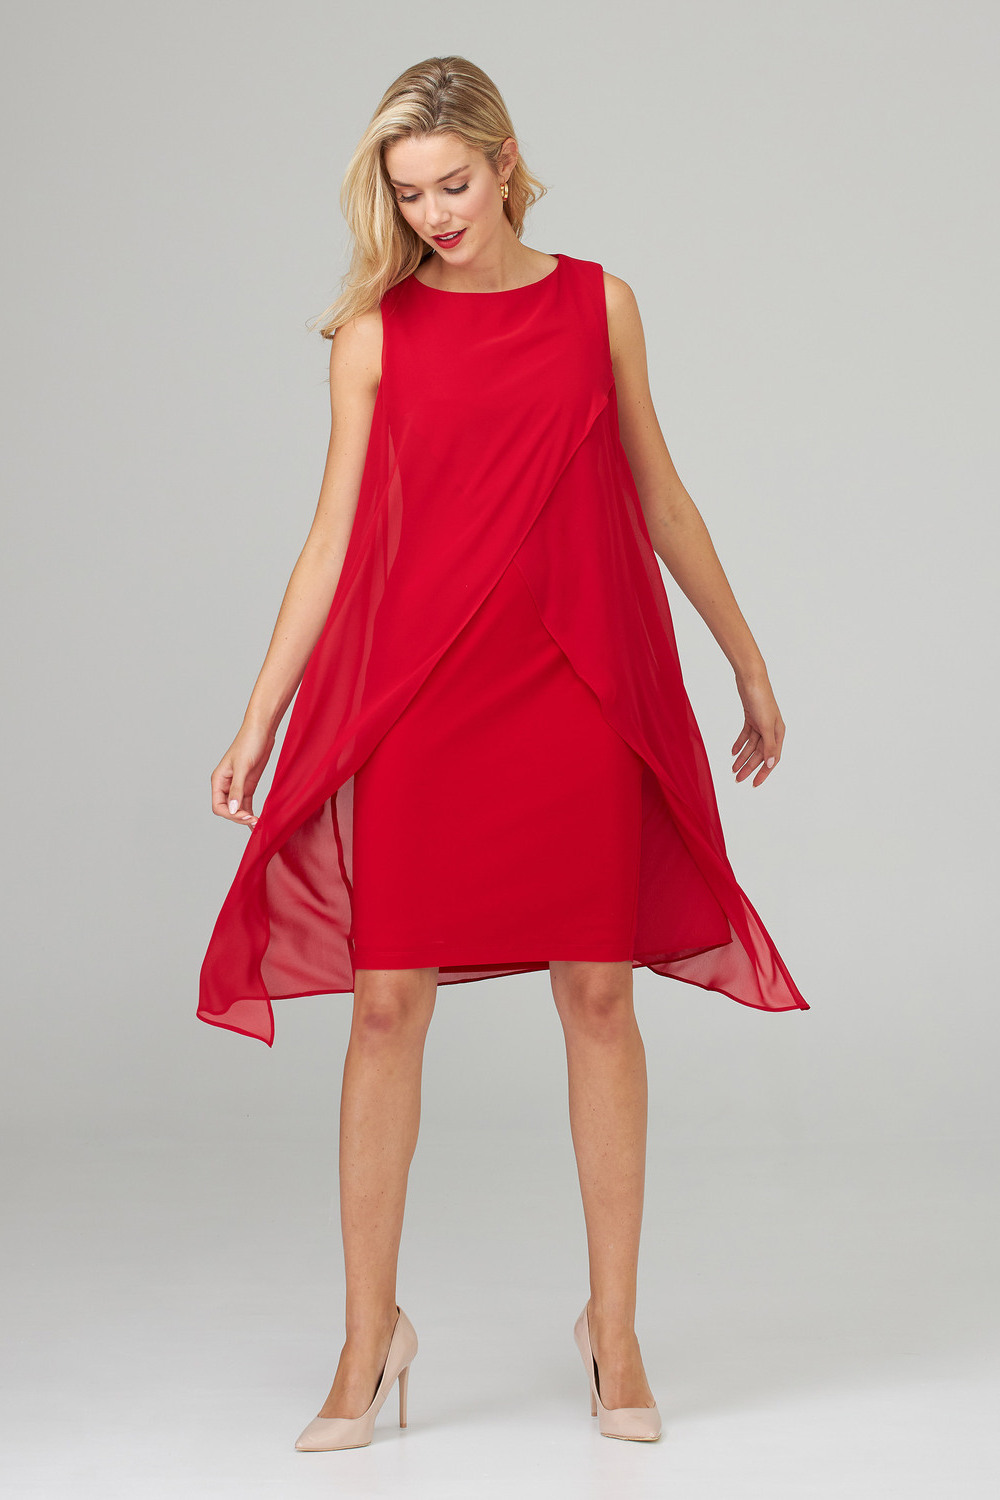 Joseph Ribkoff robe style 201220. Rouge A Levres 173